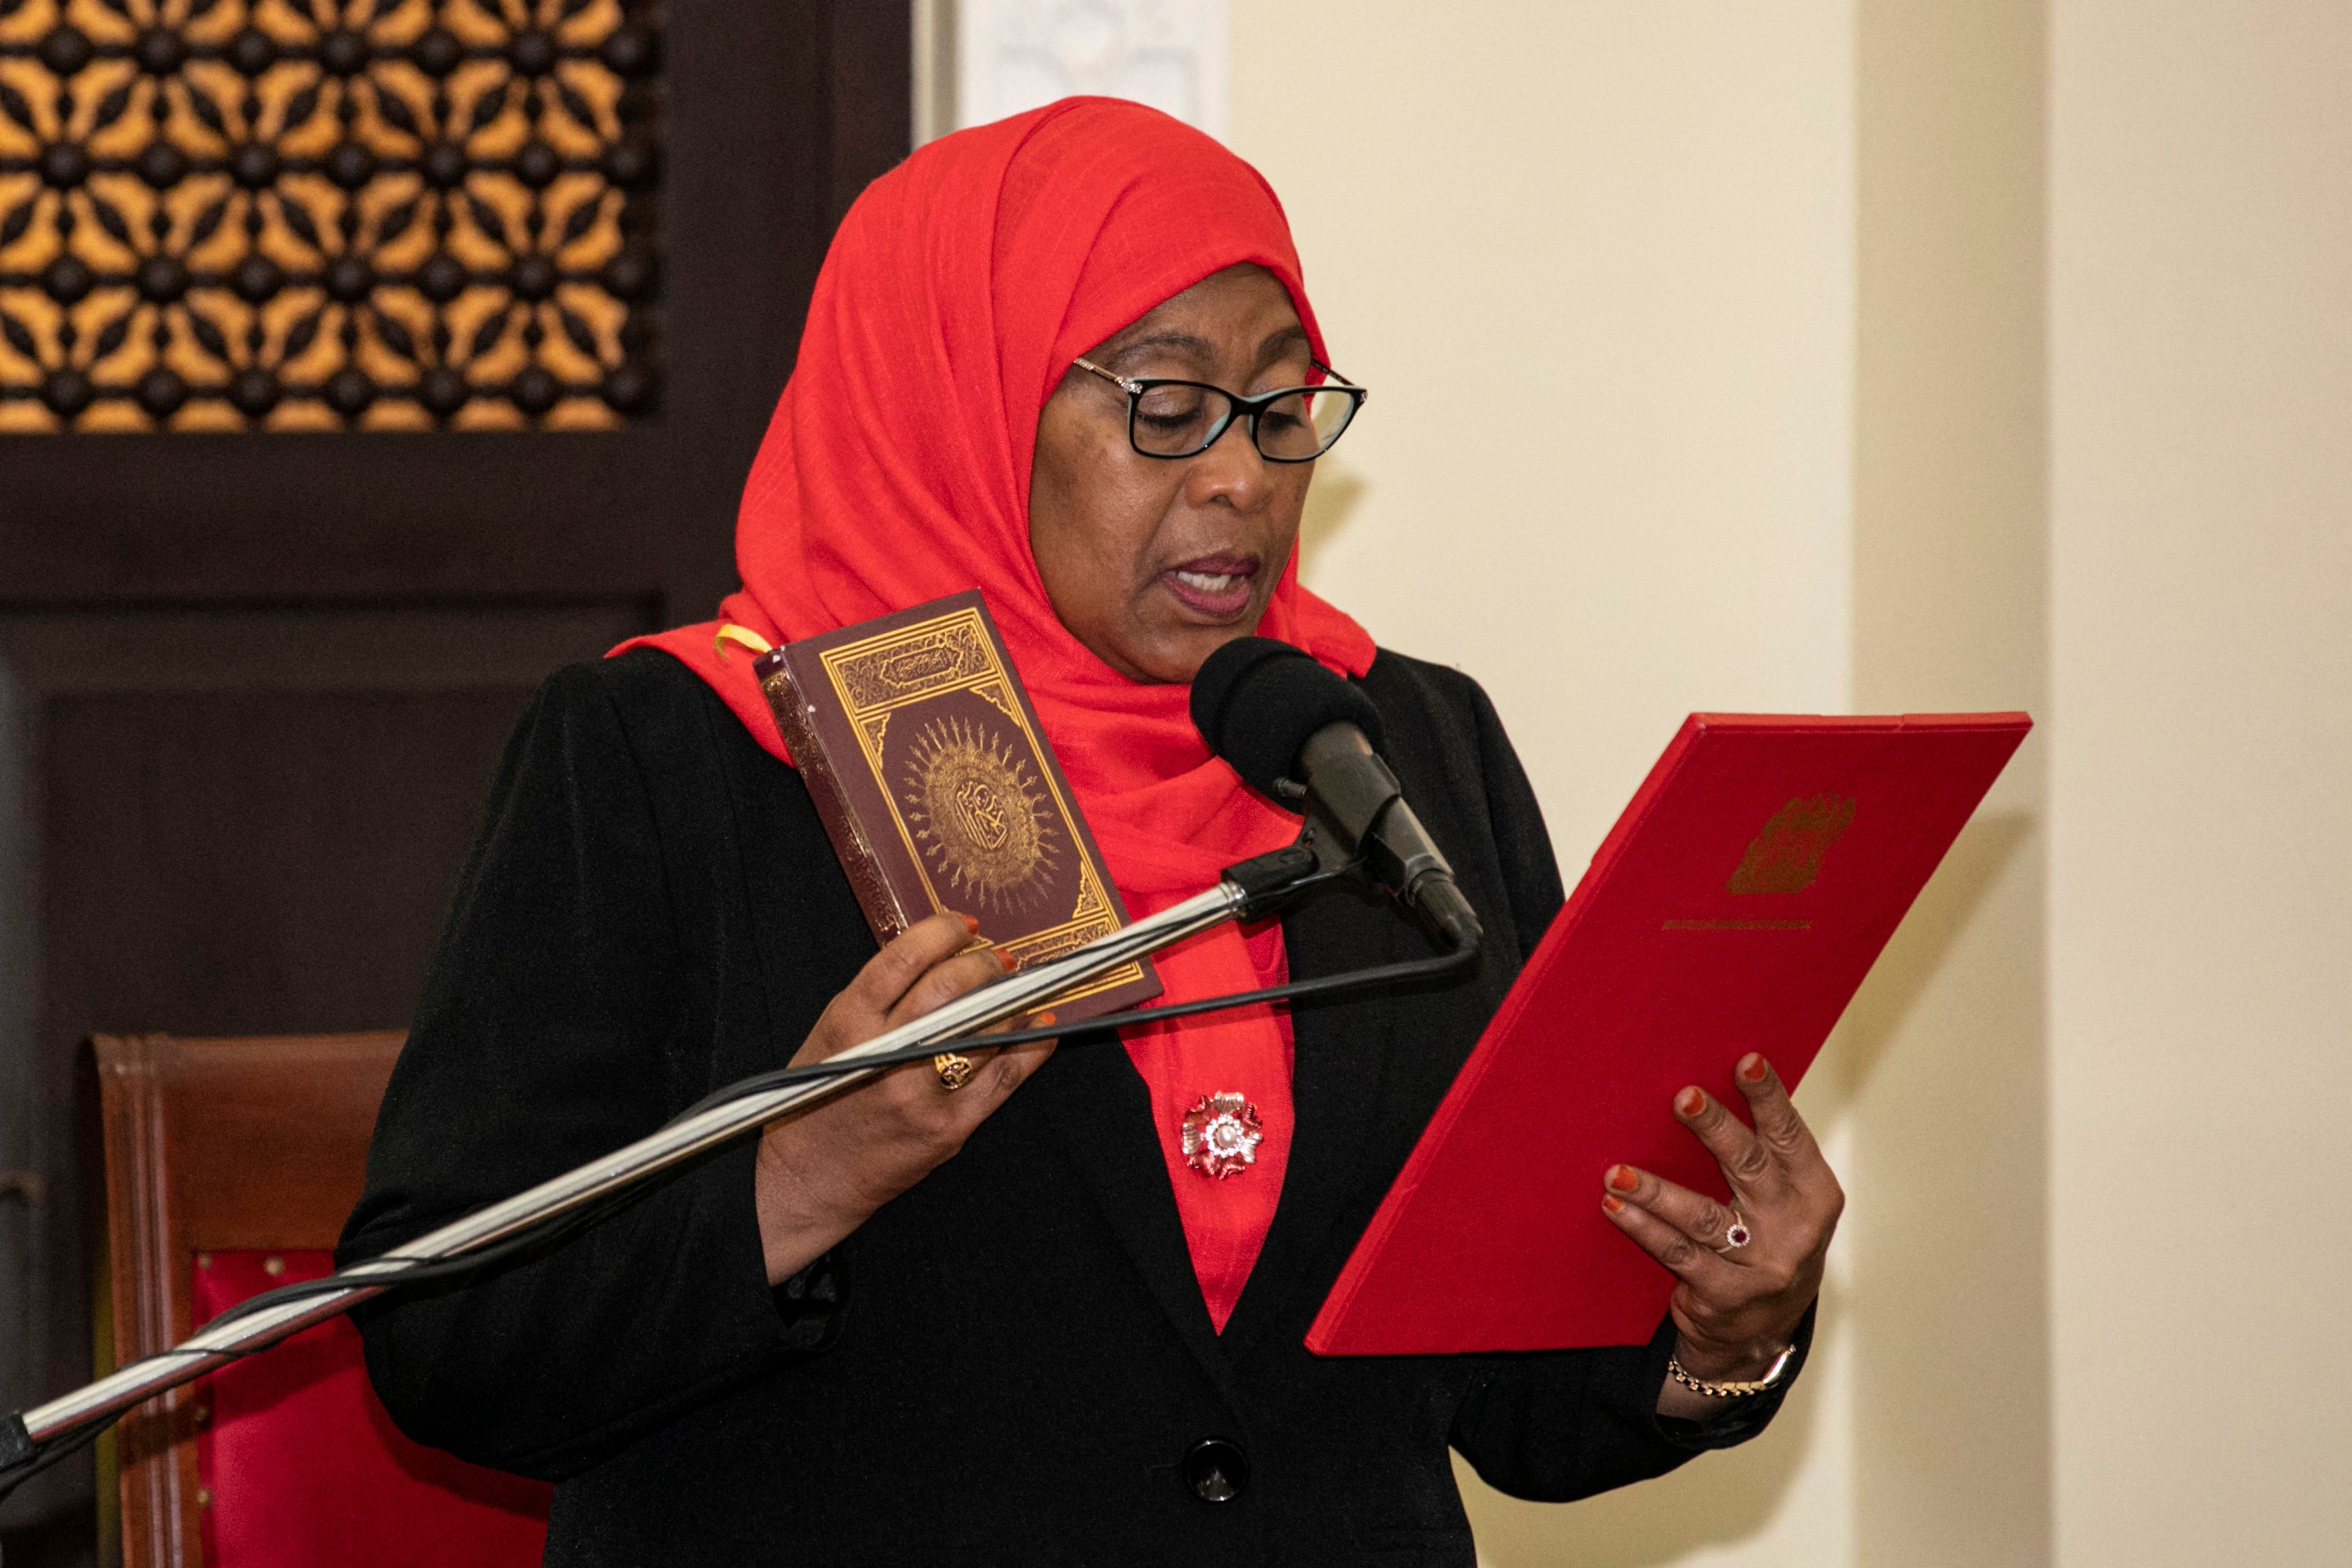 Samia Suluhu-hassan held a Quran in her right hand as she took the oath at the State House photo.